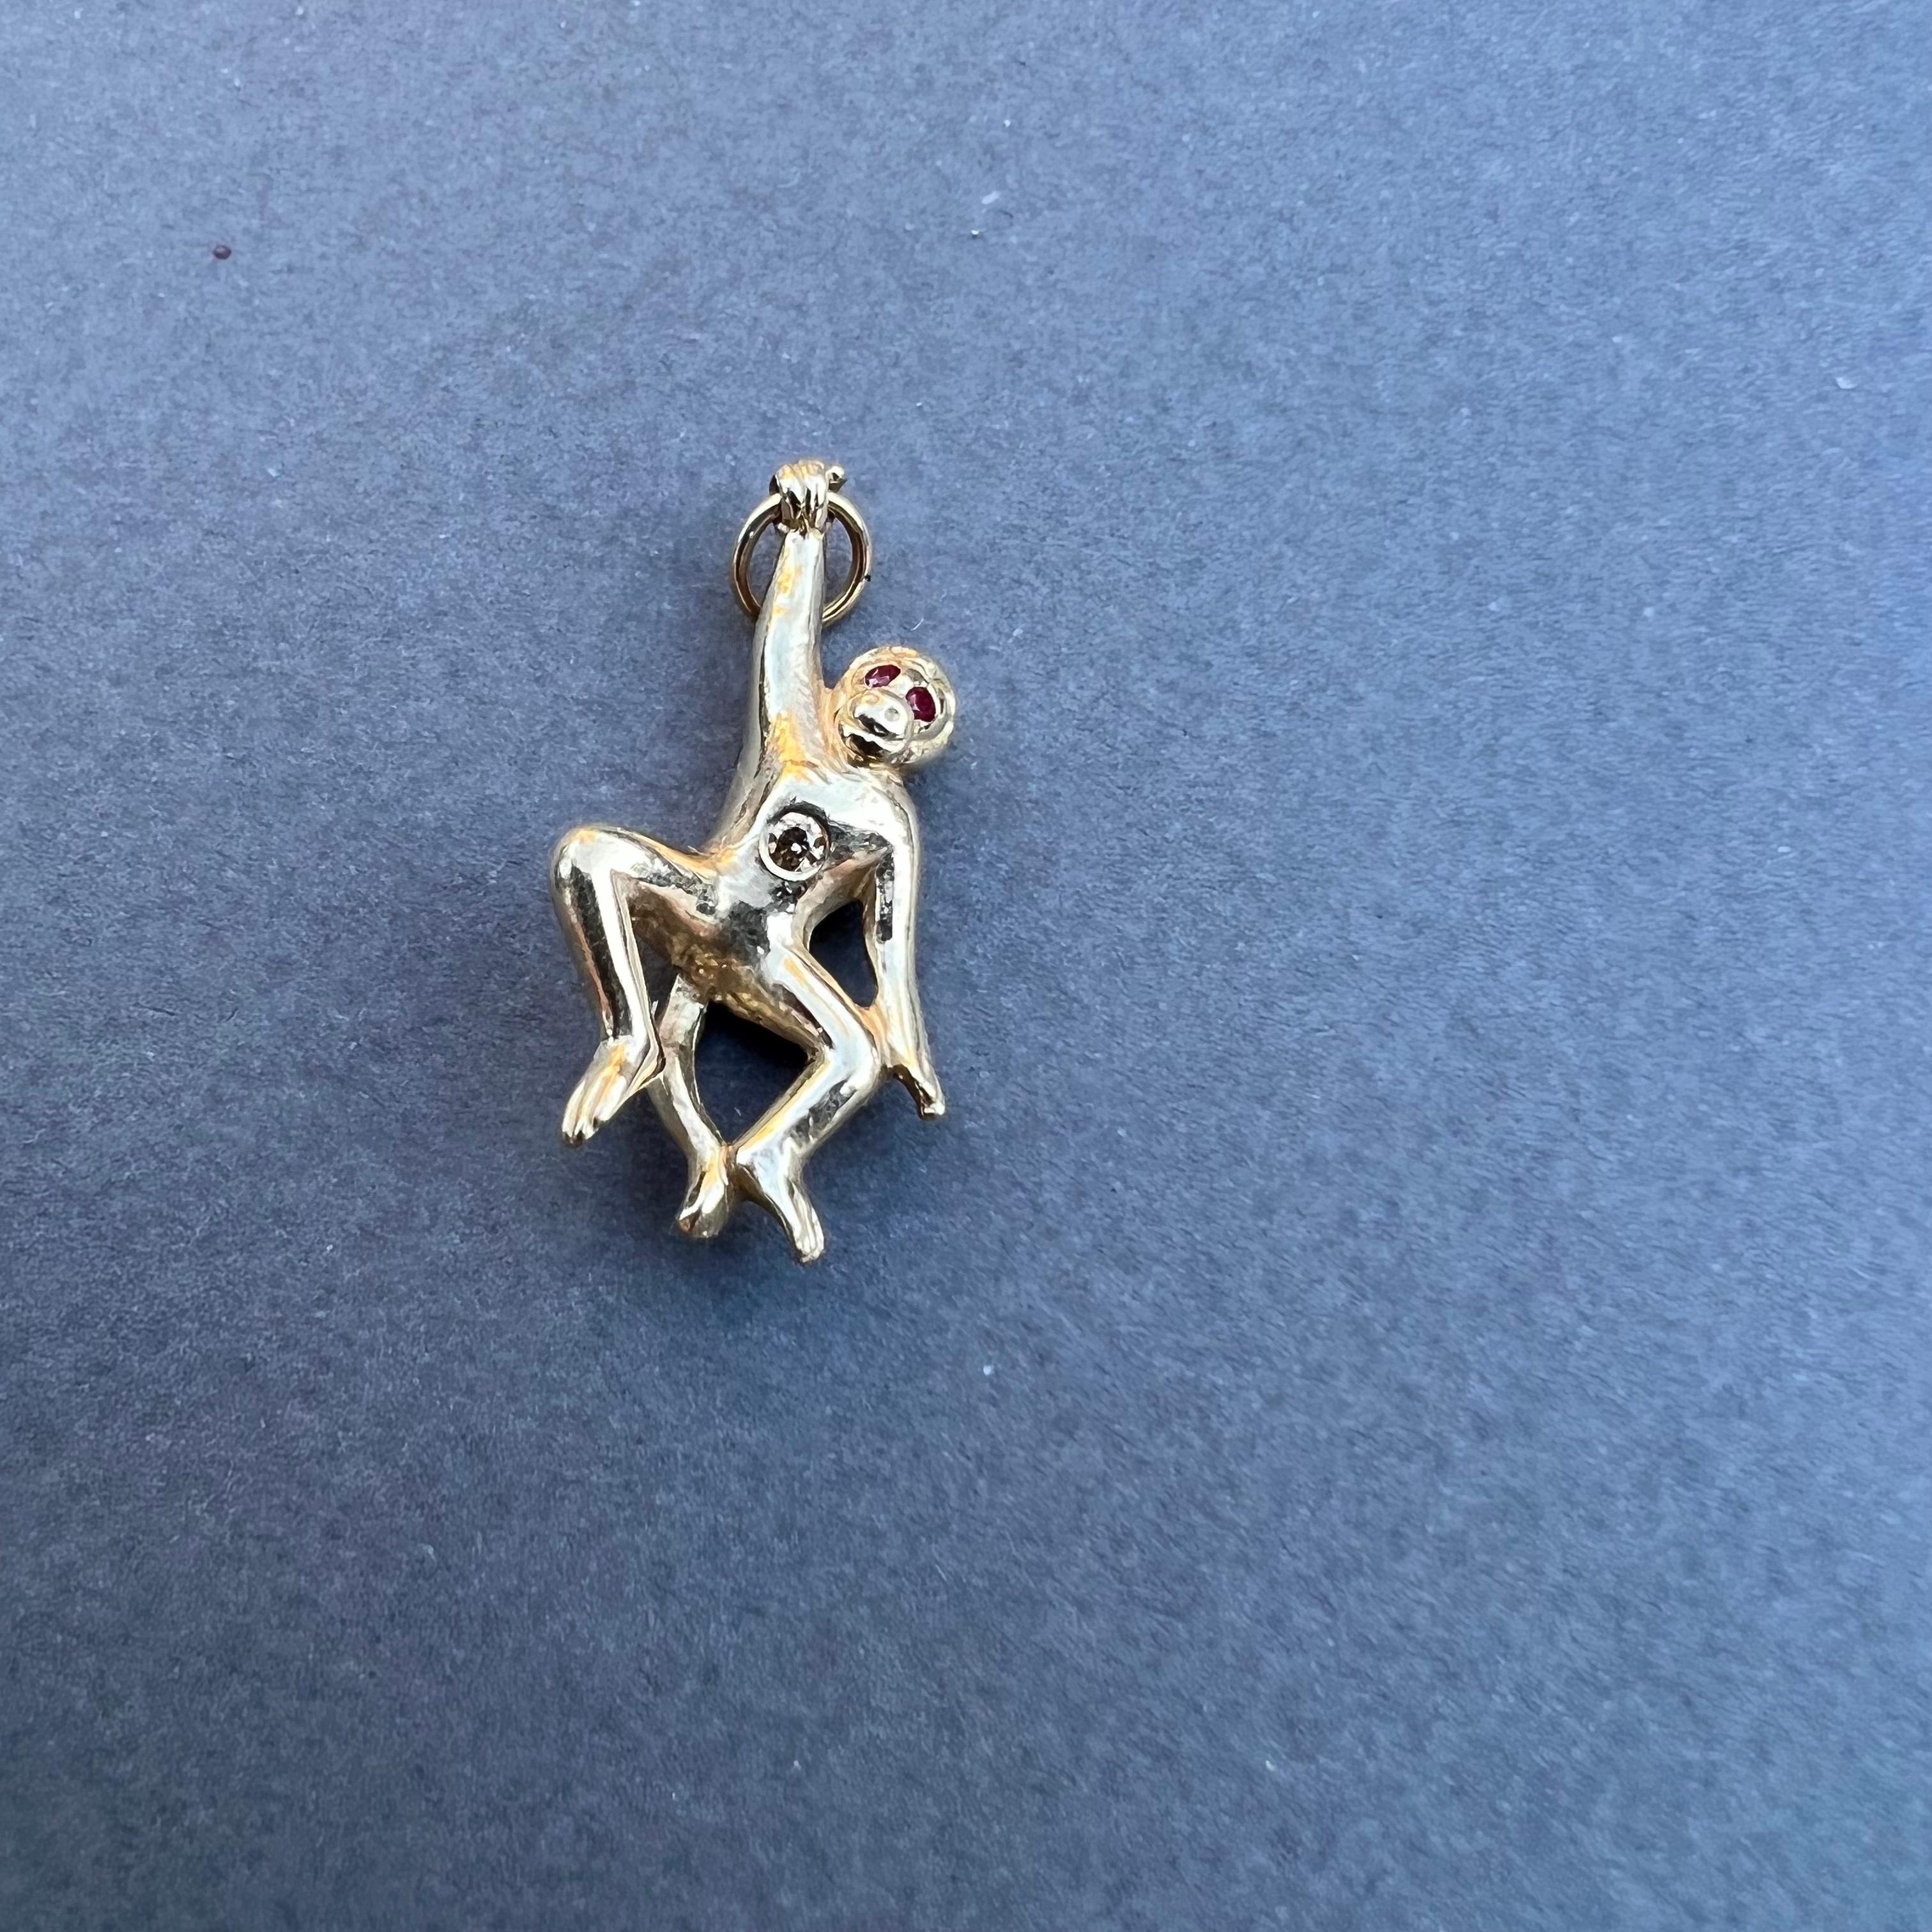 Diamond Ruby Monkey Solid Gold Pendant J Dauphin For Sale 1